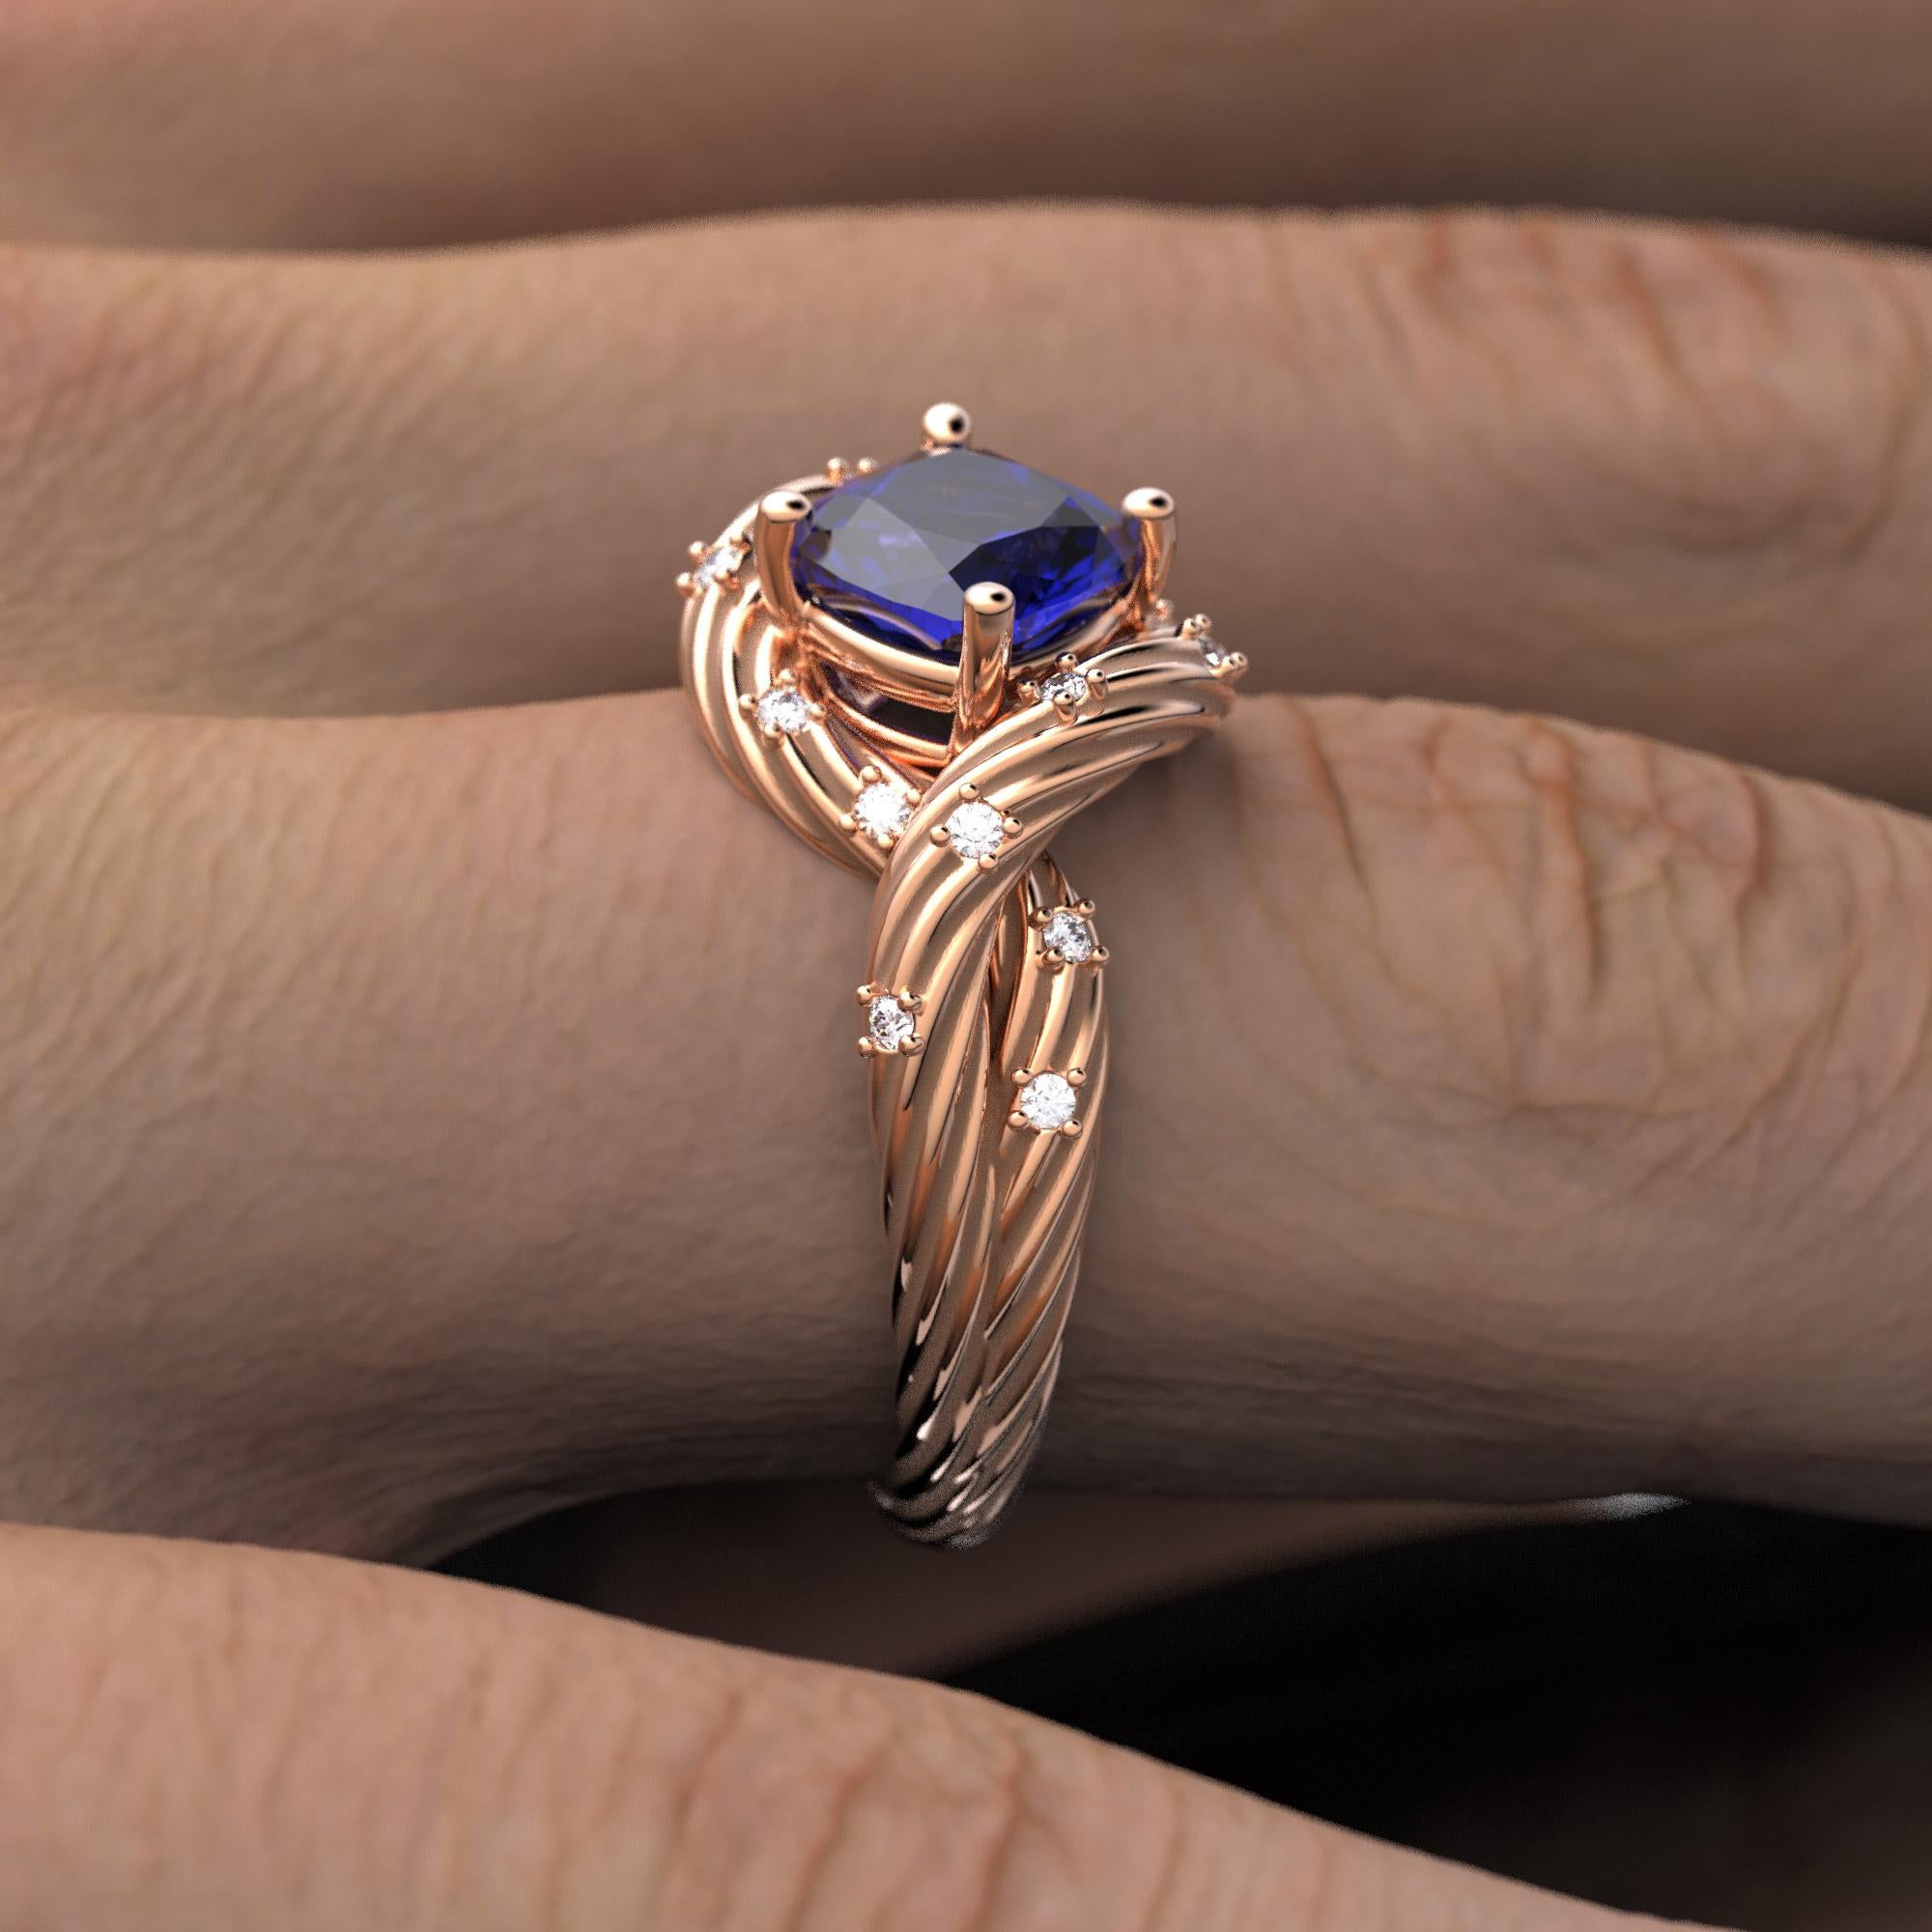 For Sale:  Tanzanite and Diamonds Ring 14k Solid Gold, Italian Fine Jewelry, made to order. 12